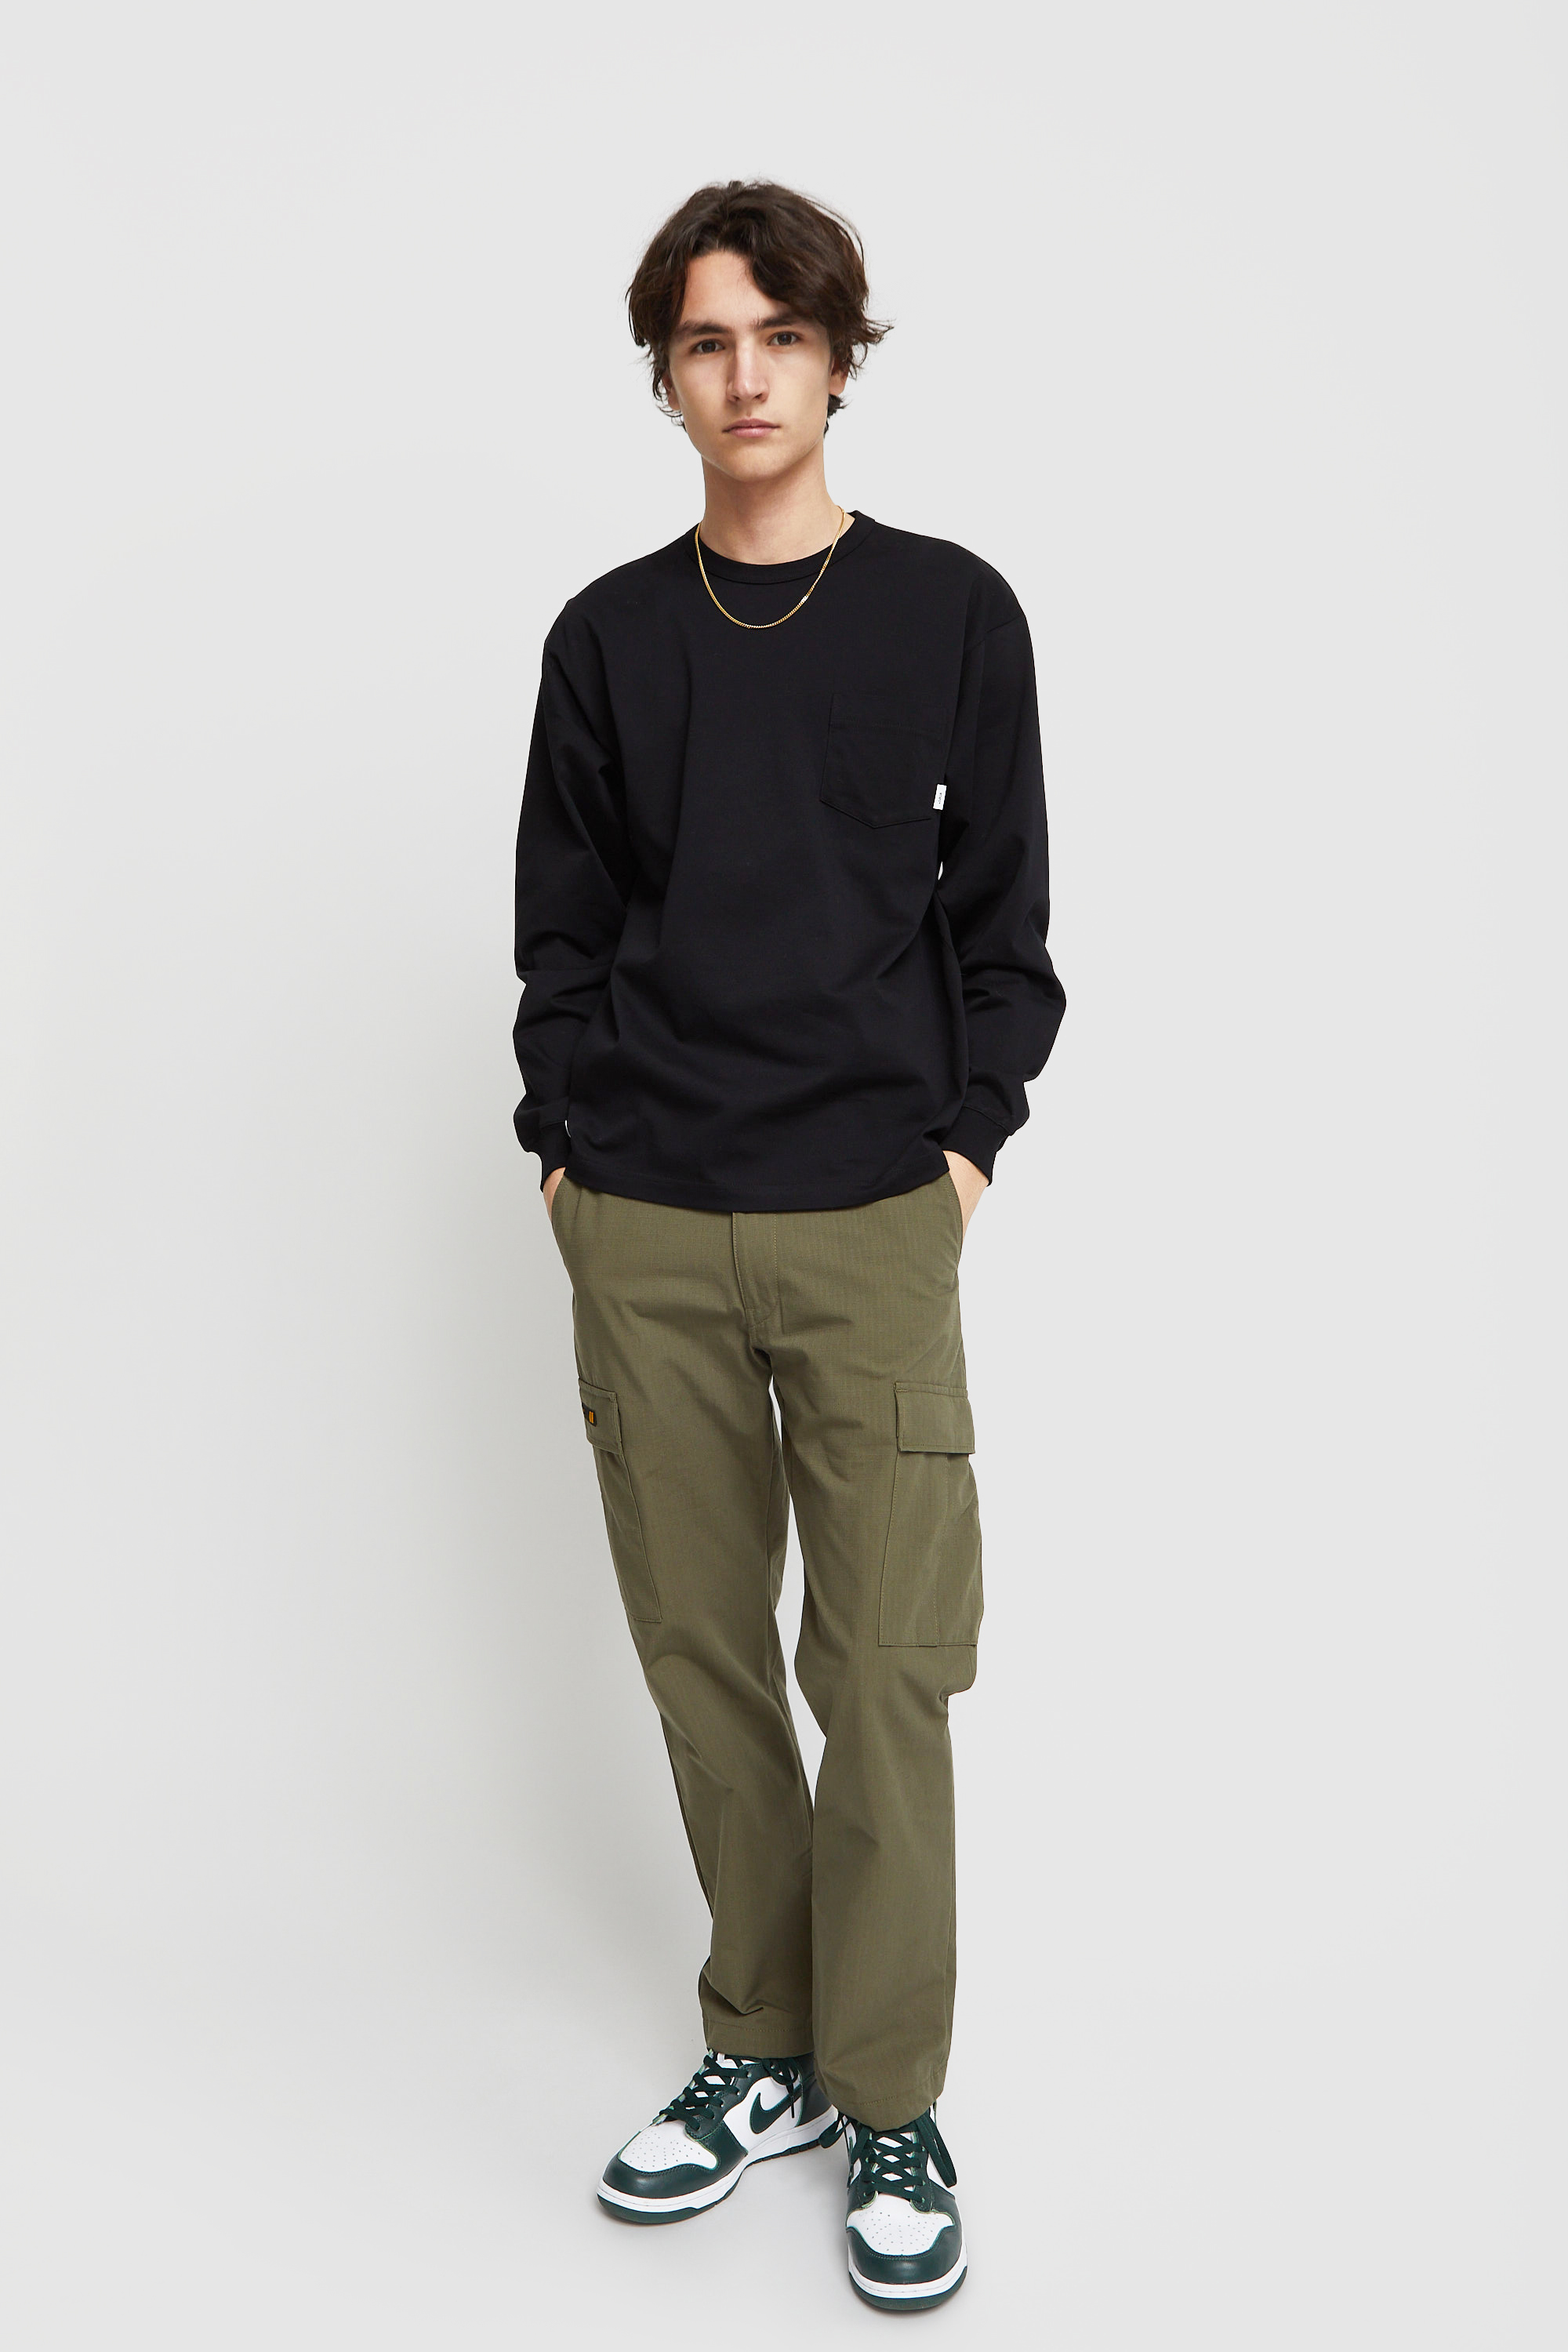 JUNGLE STOCK / TROUSERS / NYCO. RIPSTOP-